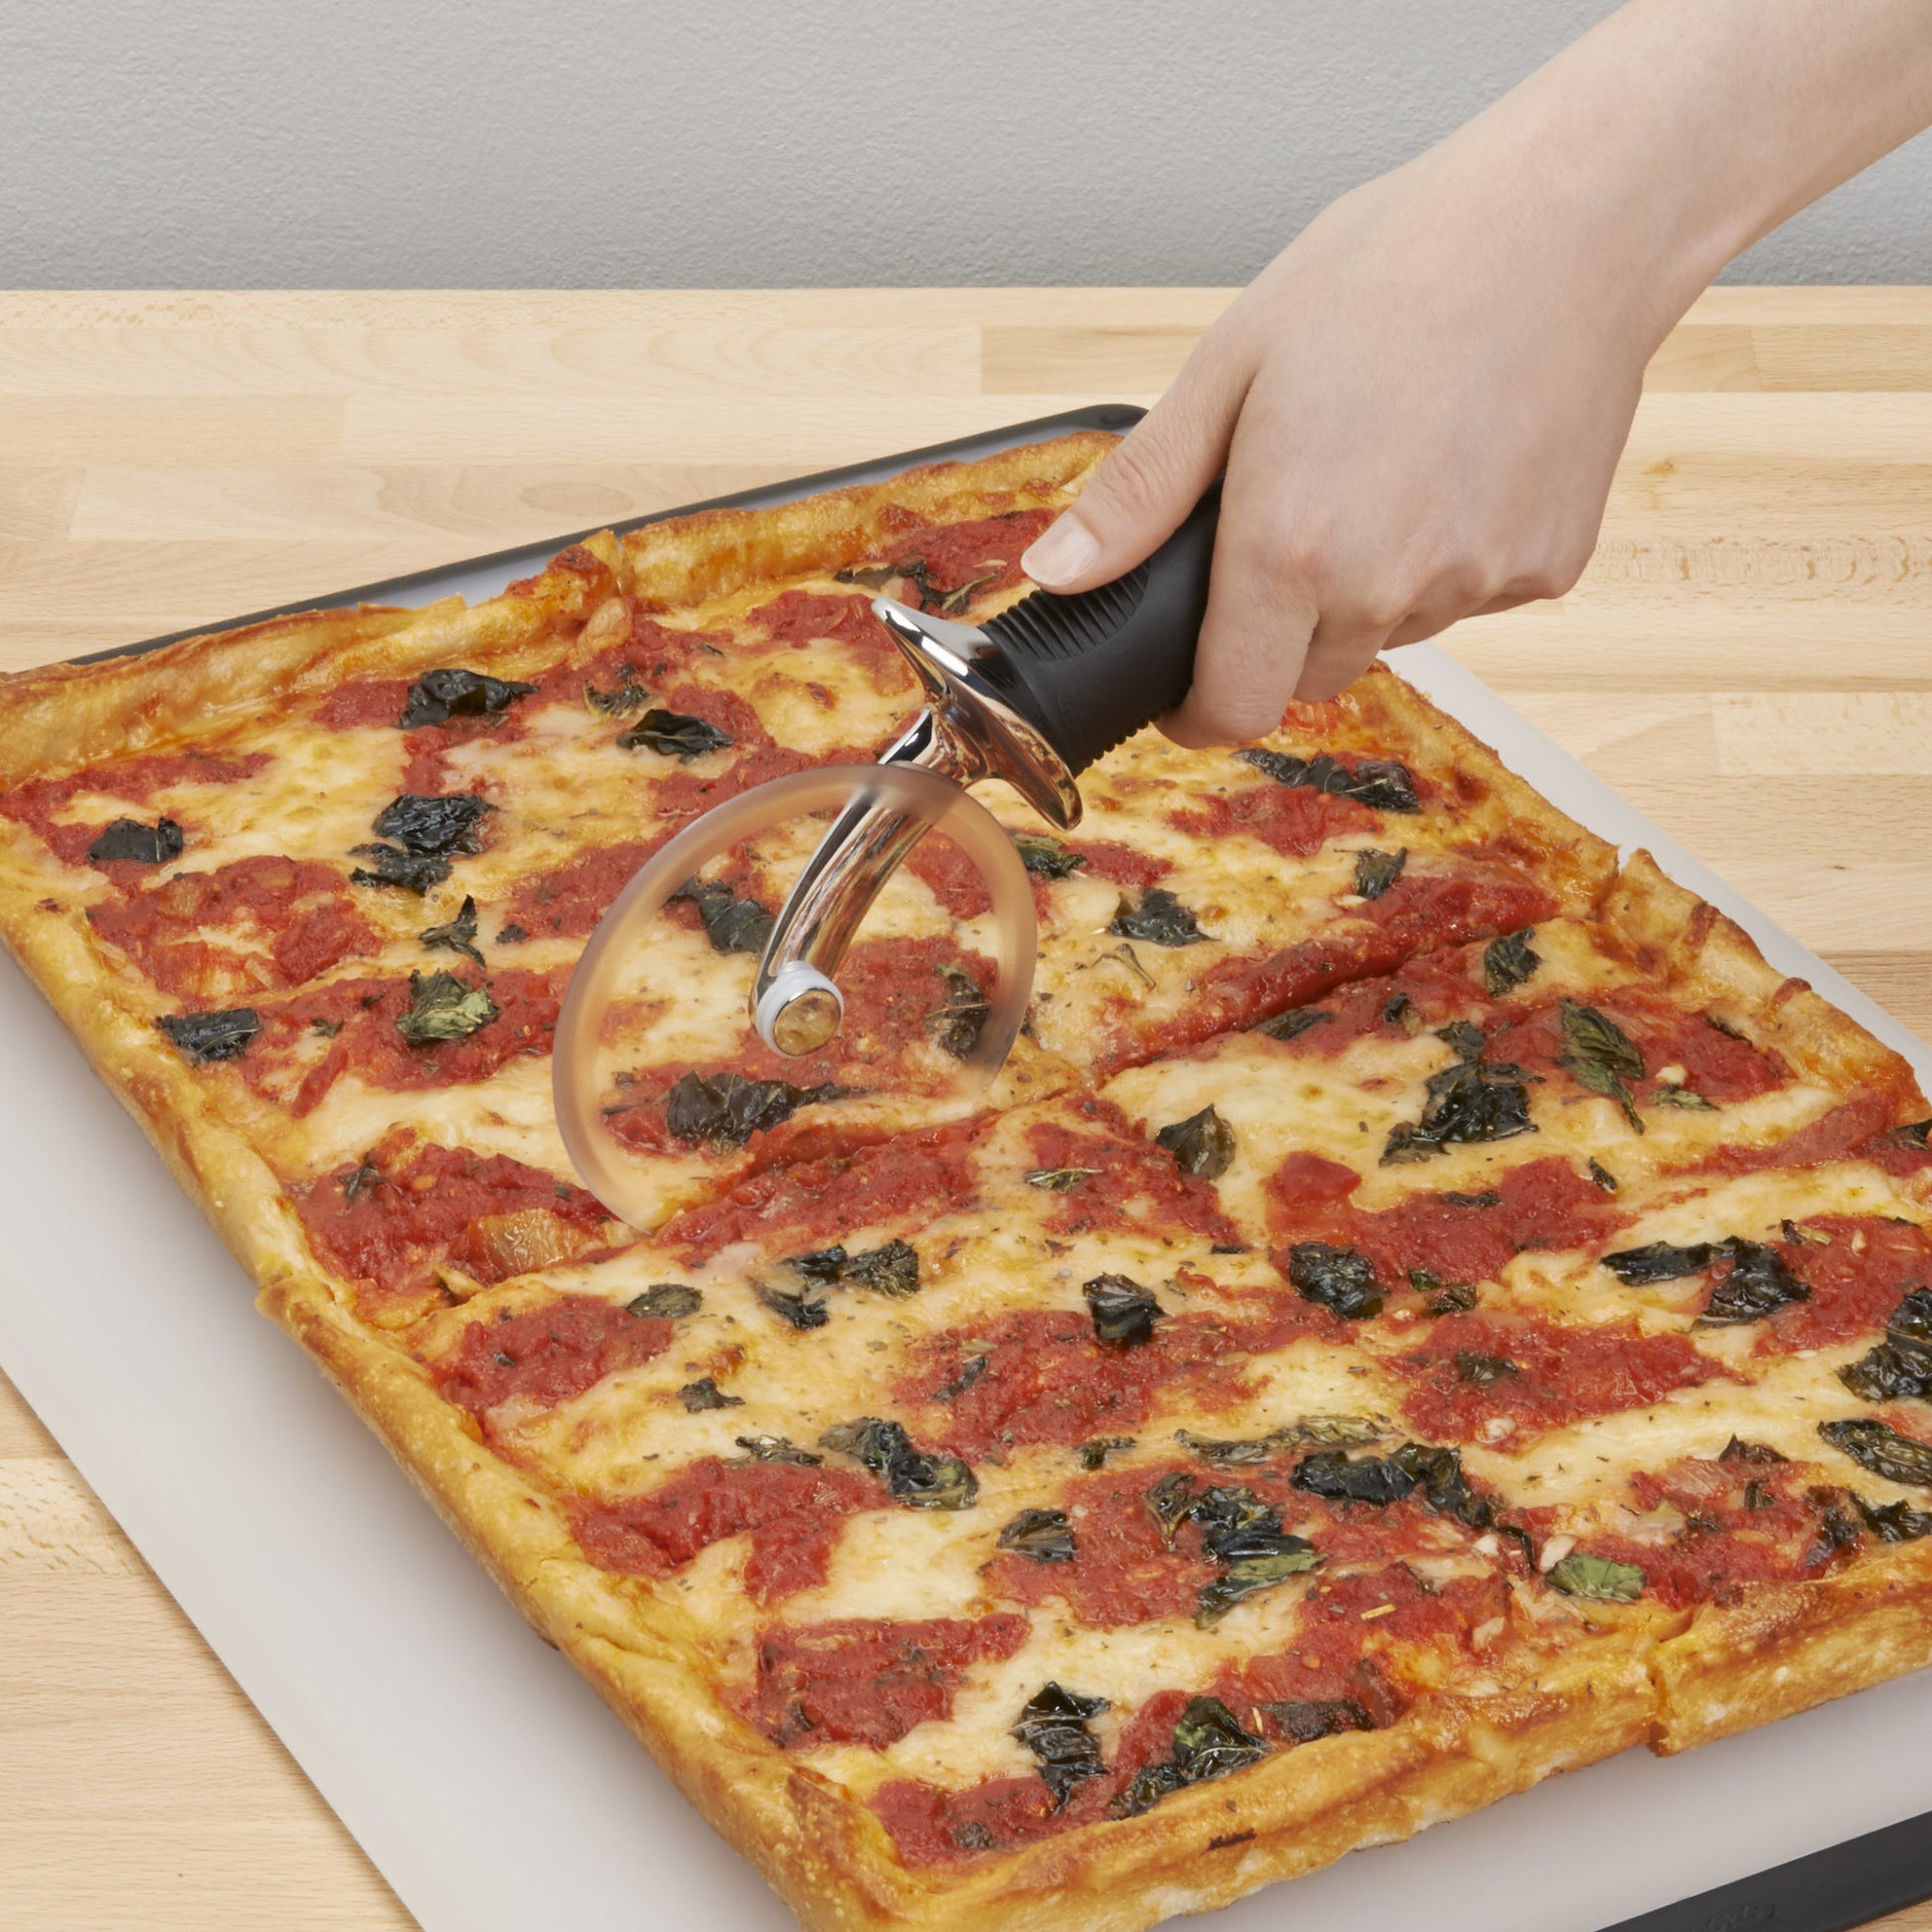 hand using pizza wheel to cut square pizza on cutting board.